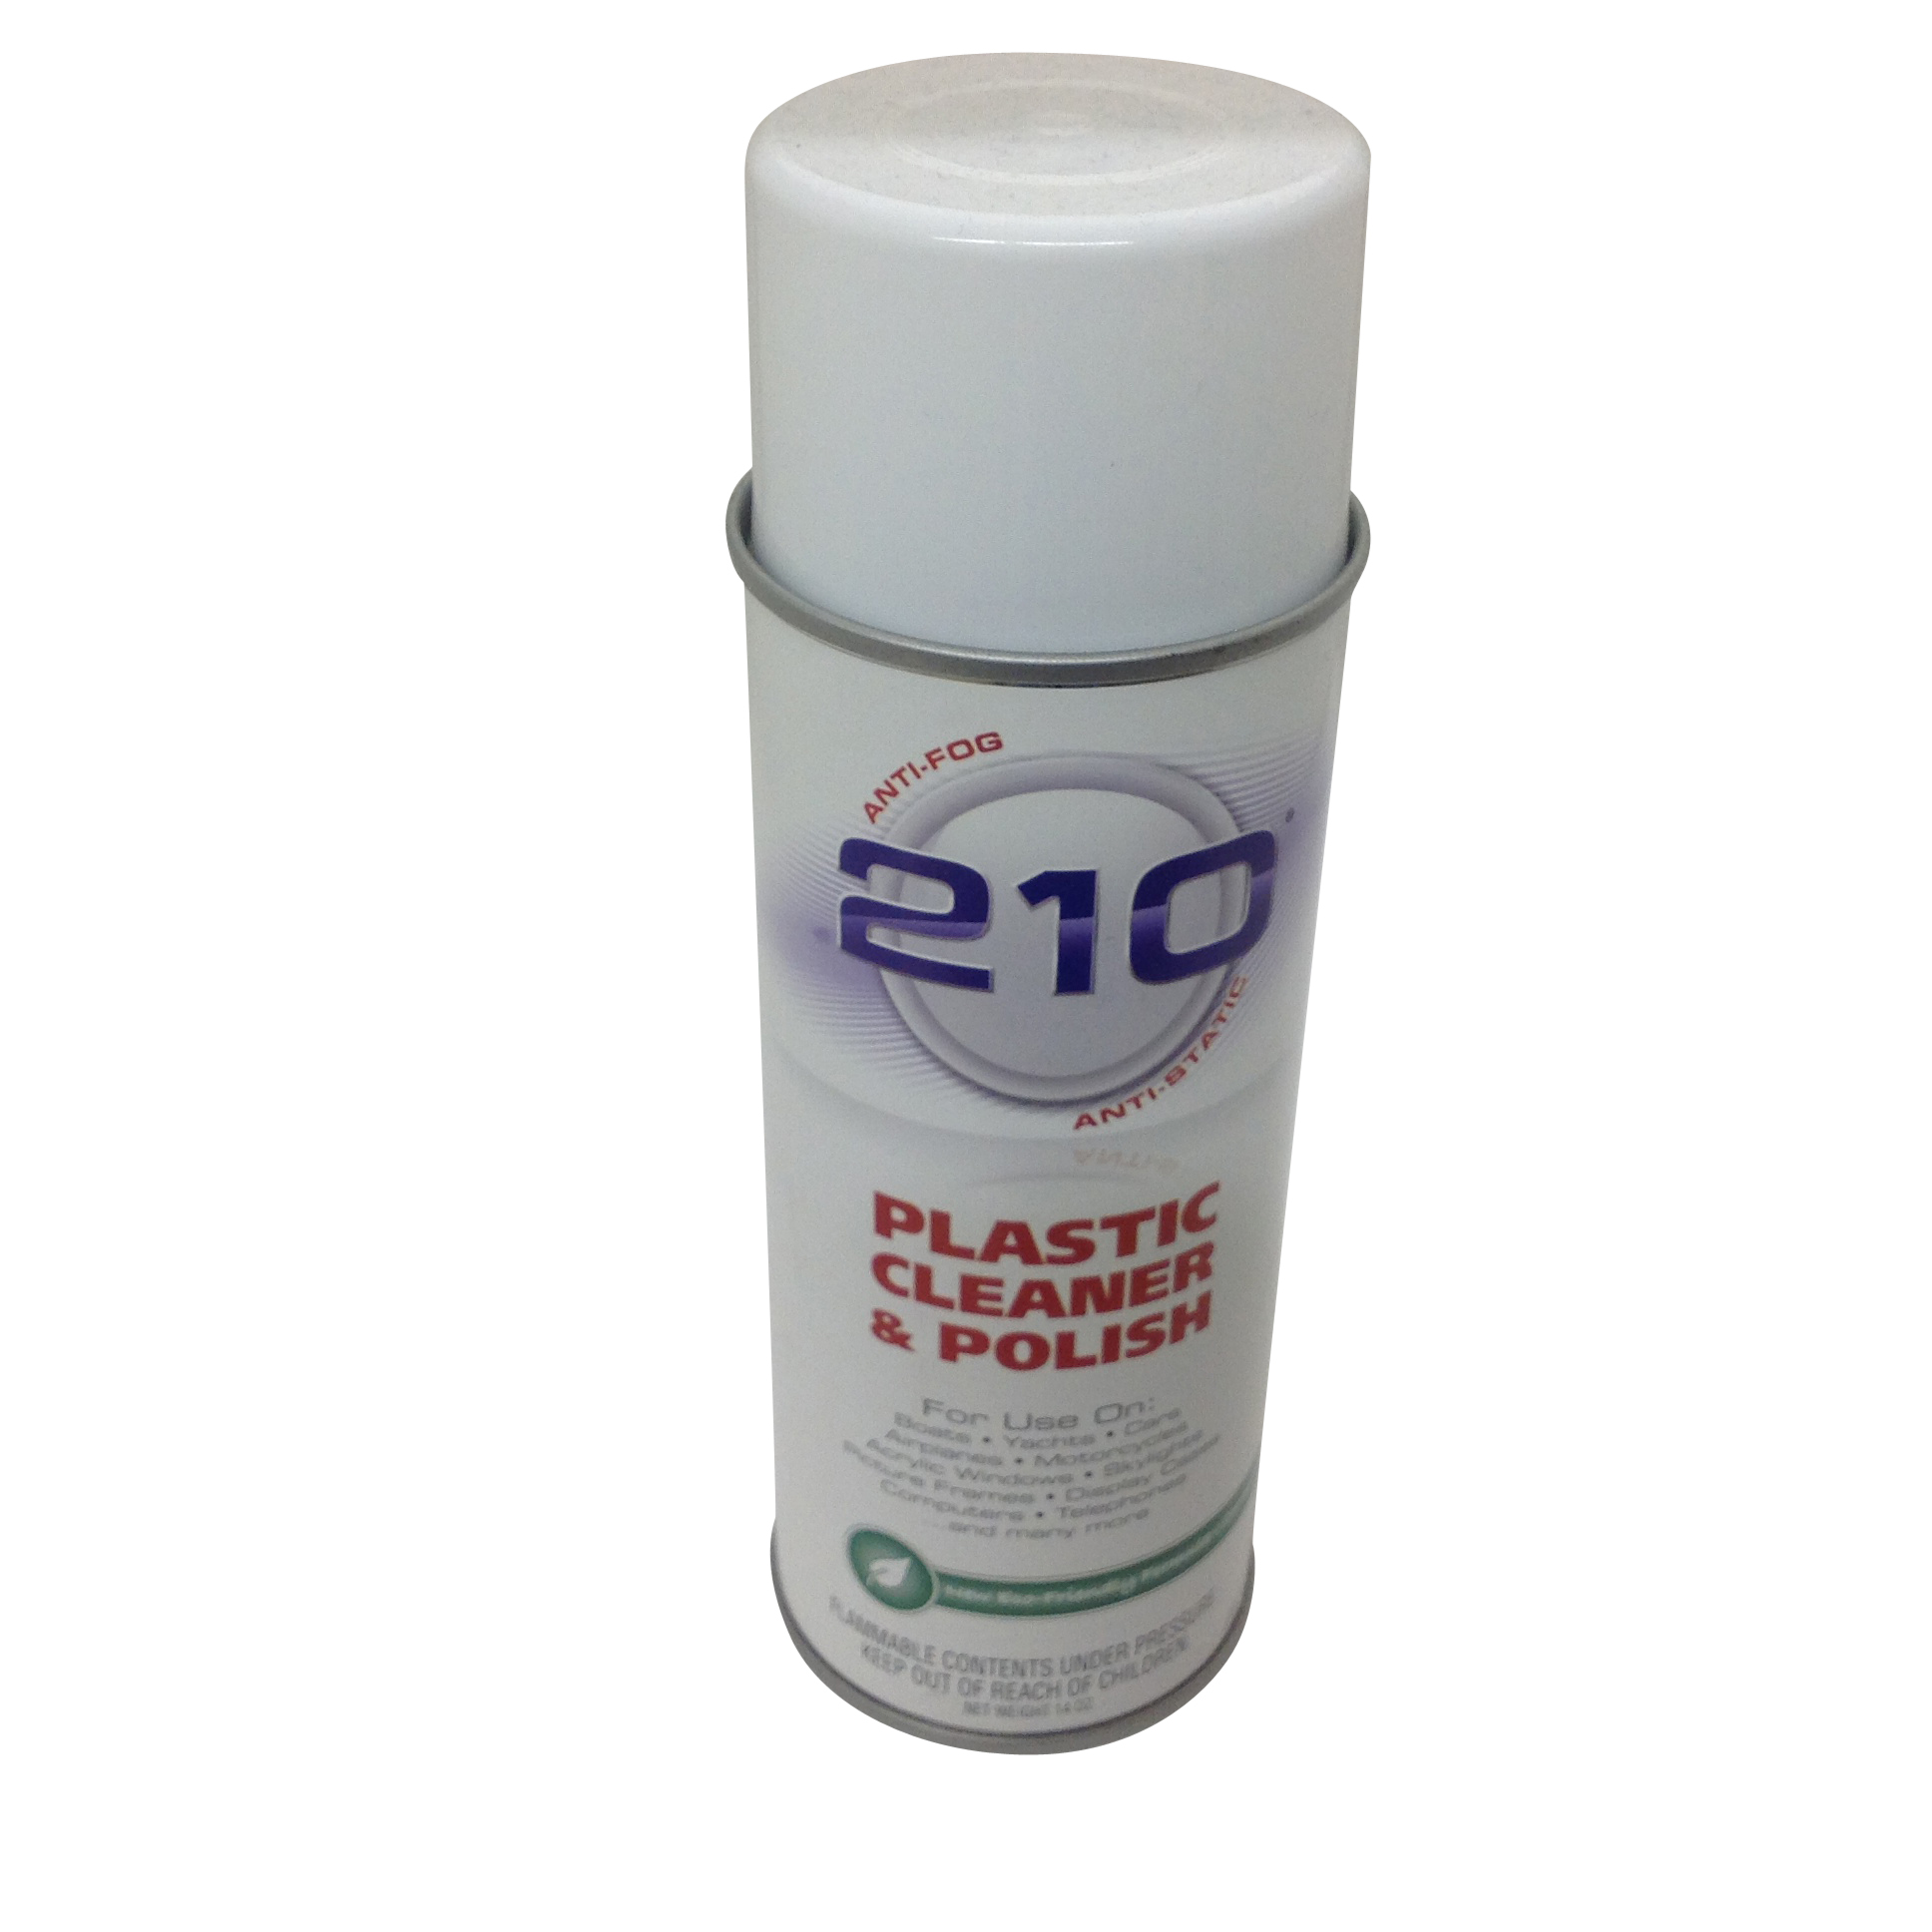 210 Plastic Cleaner and Polish